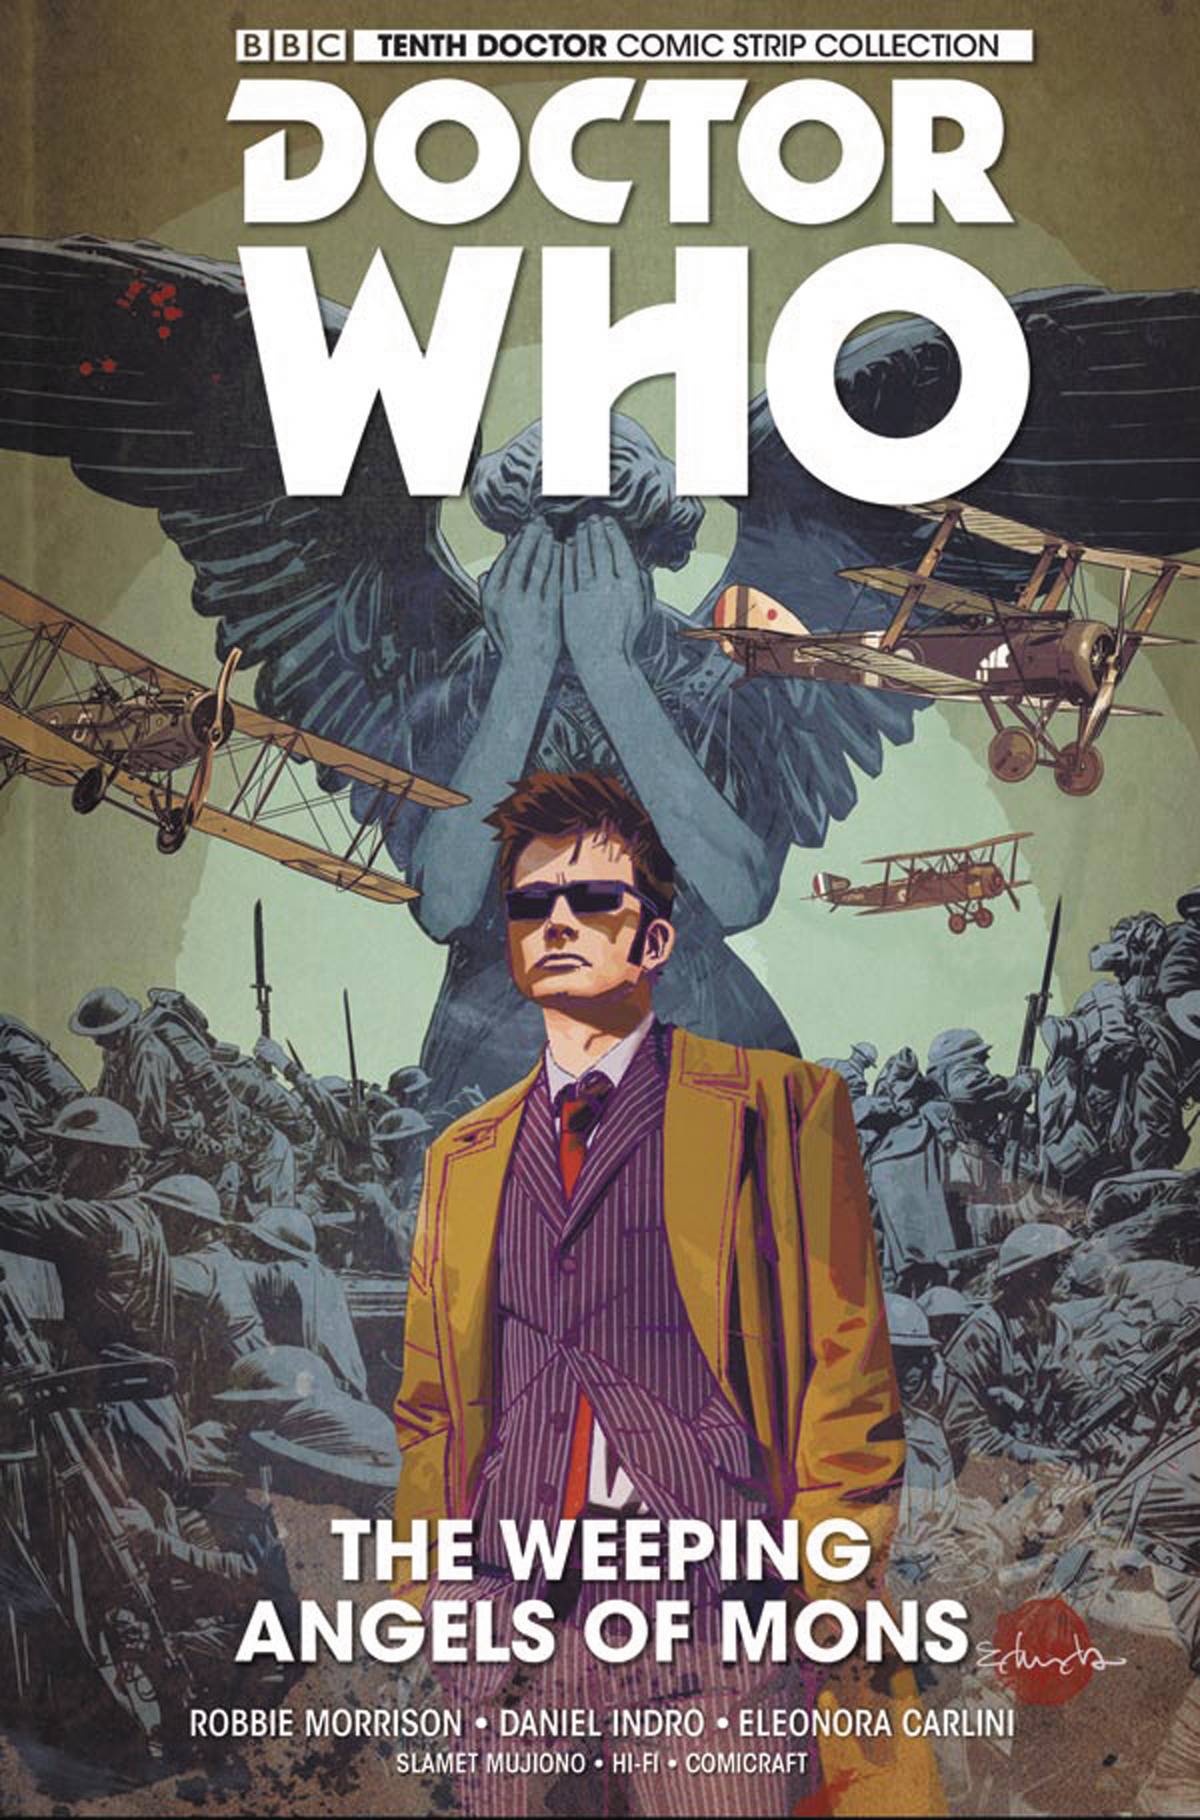 Doctor Who 10th Doctor Graphic Novel Volume 2 Weeping Angels of Mons